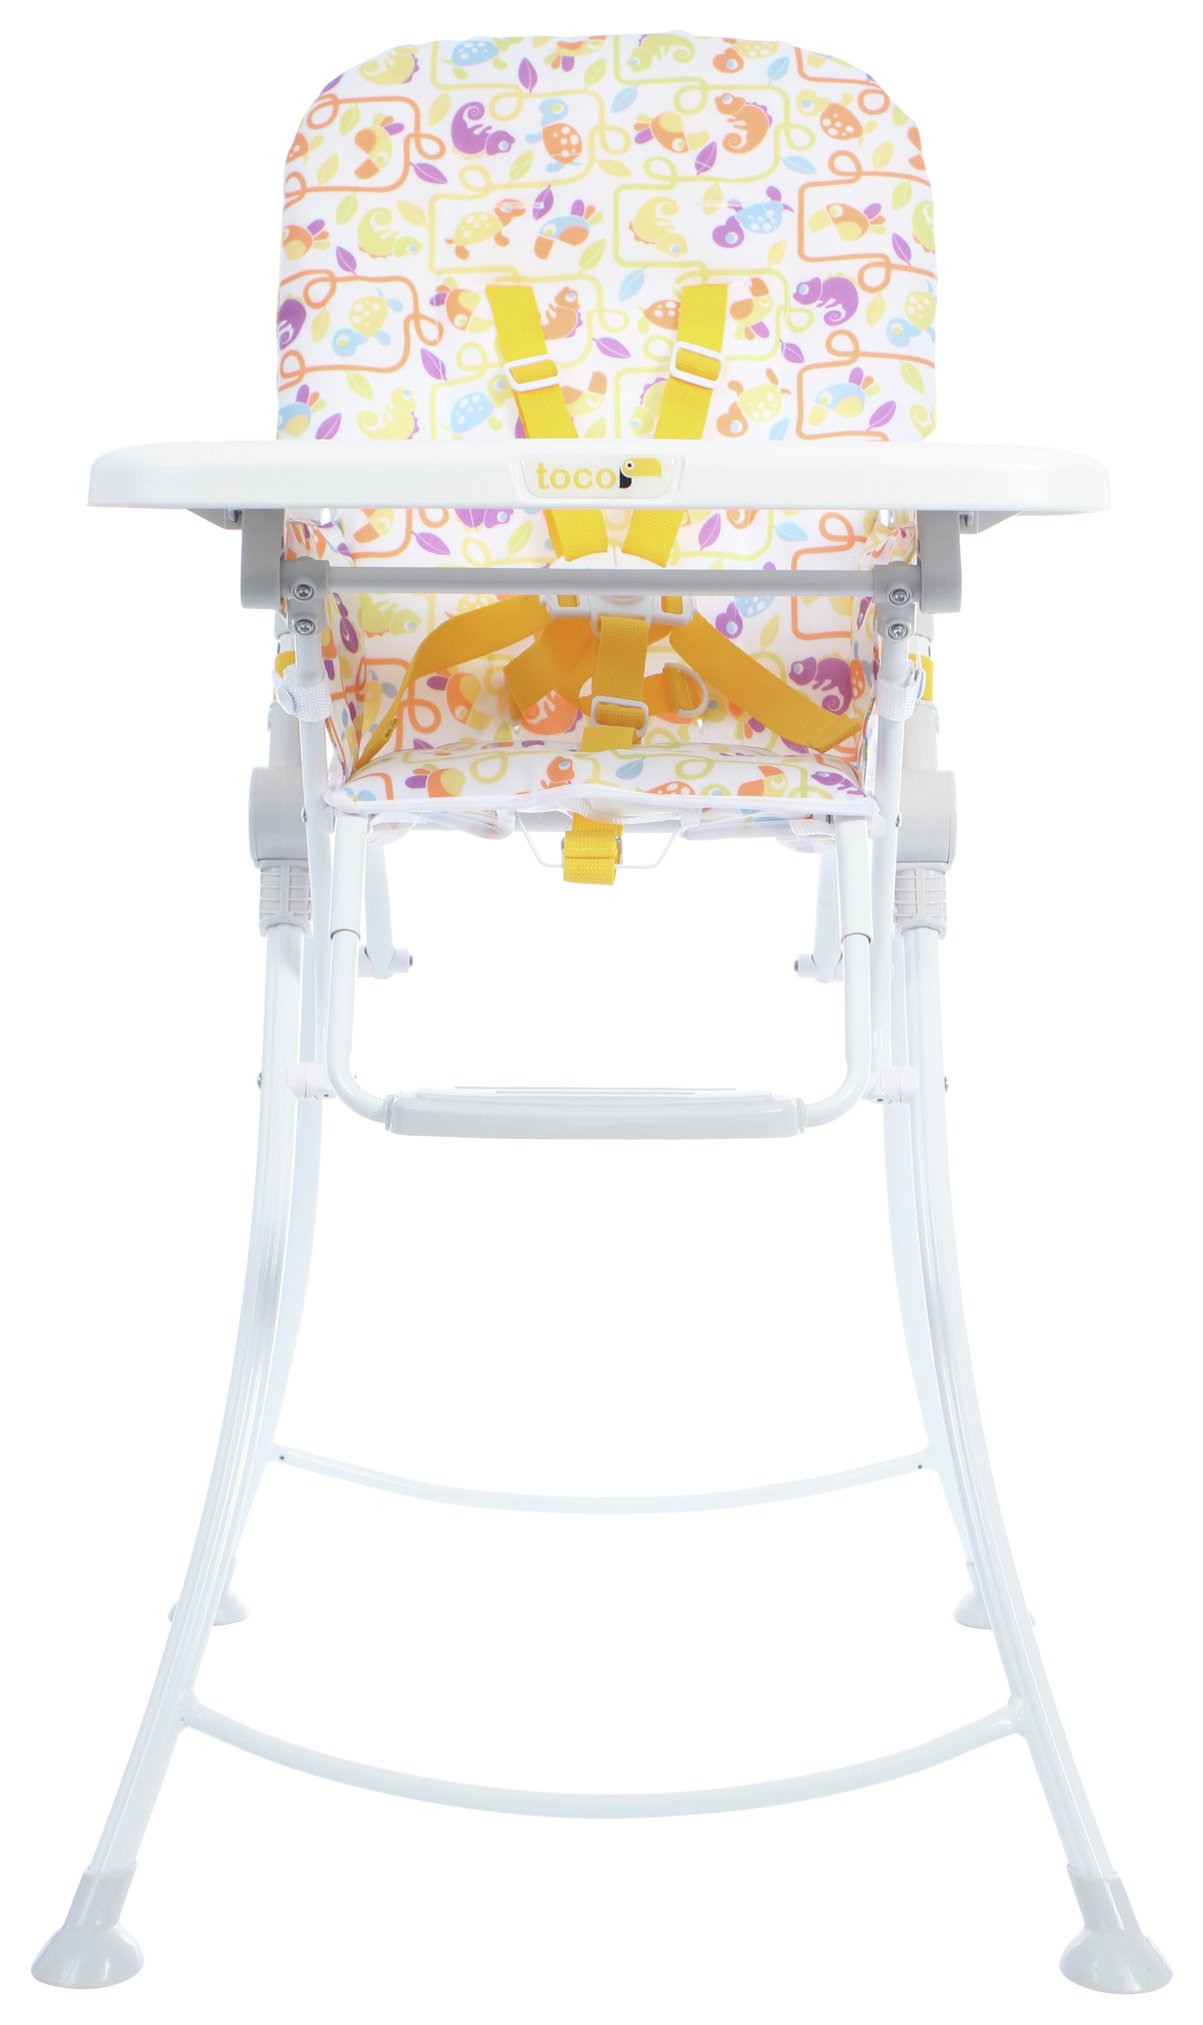 Toco Galley Compact Folding Highchair. Review